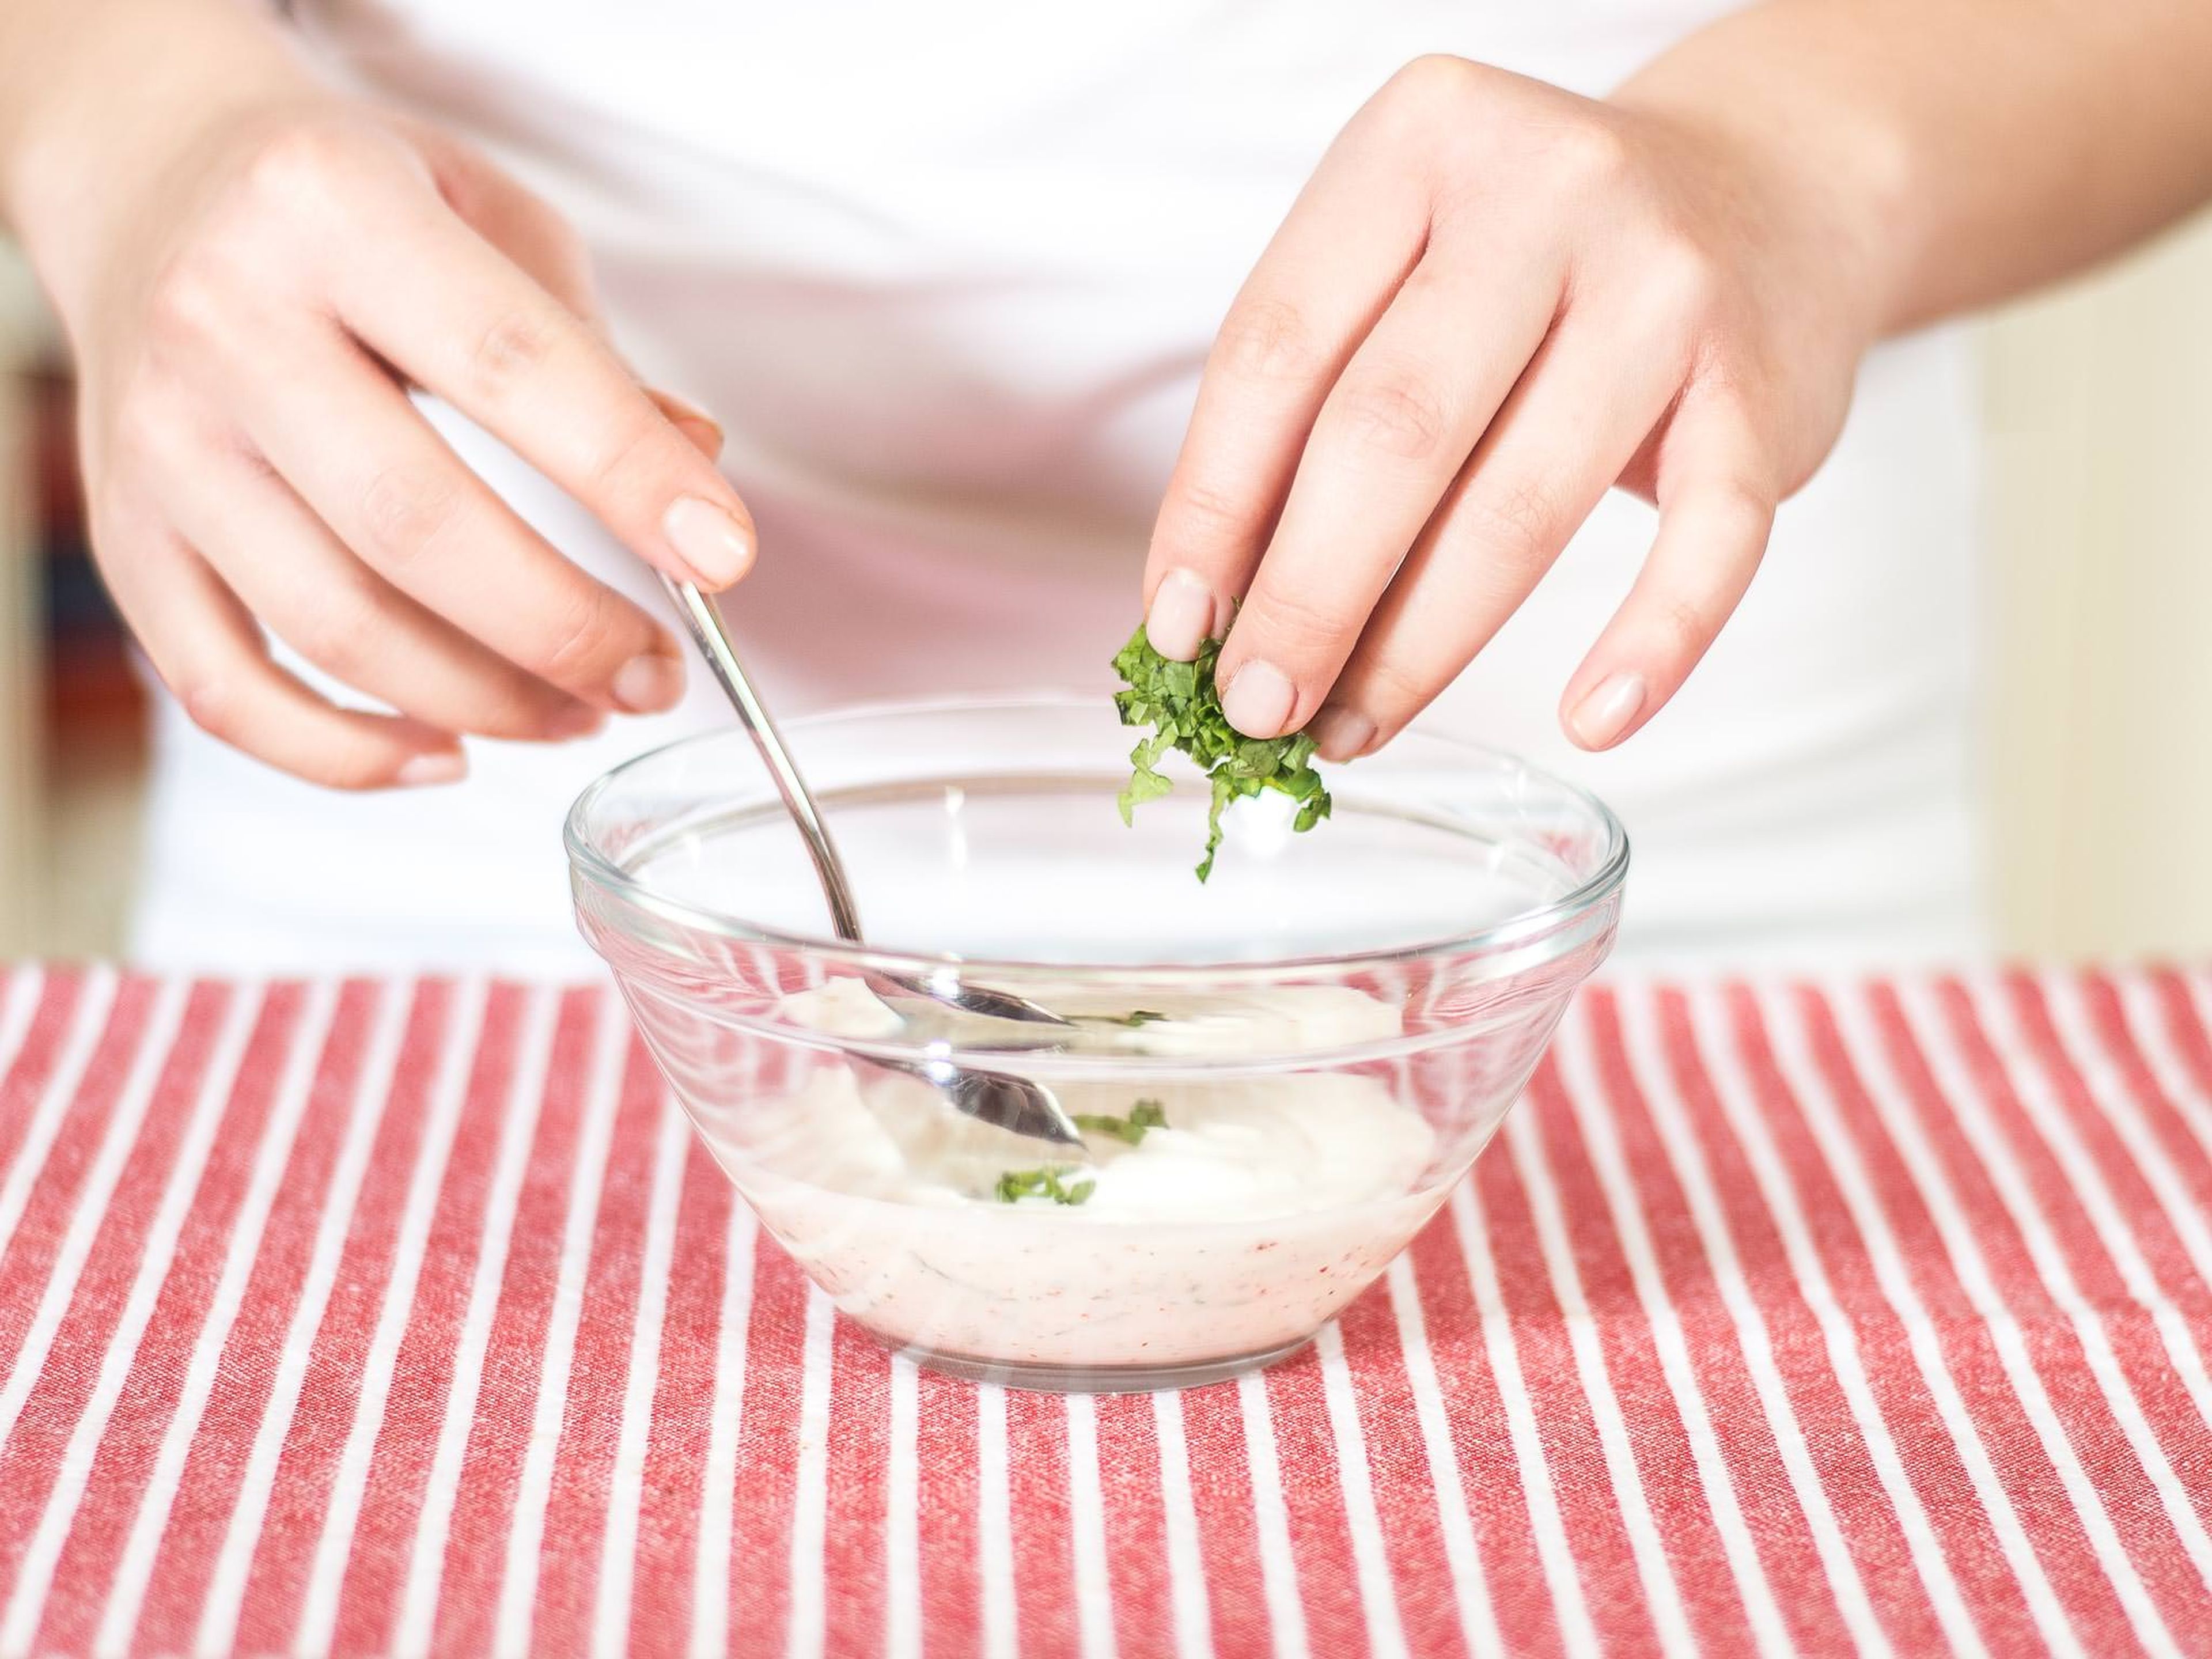 For the spread, mix the soy yogurt with mint strips, lime juice, chili powder, sugar, and salt and pepper.